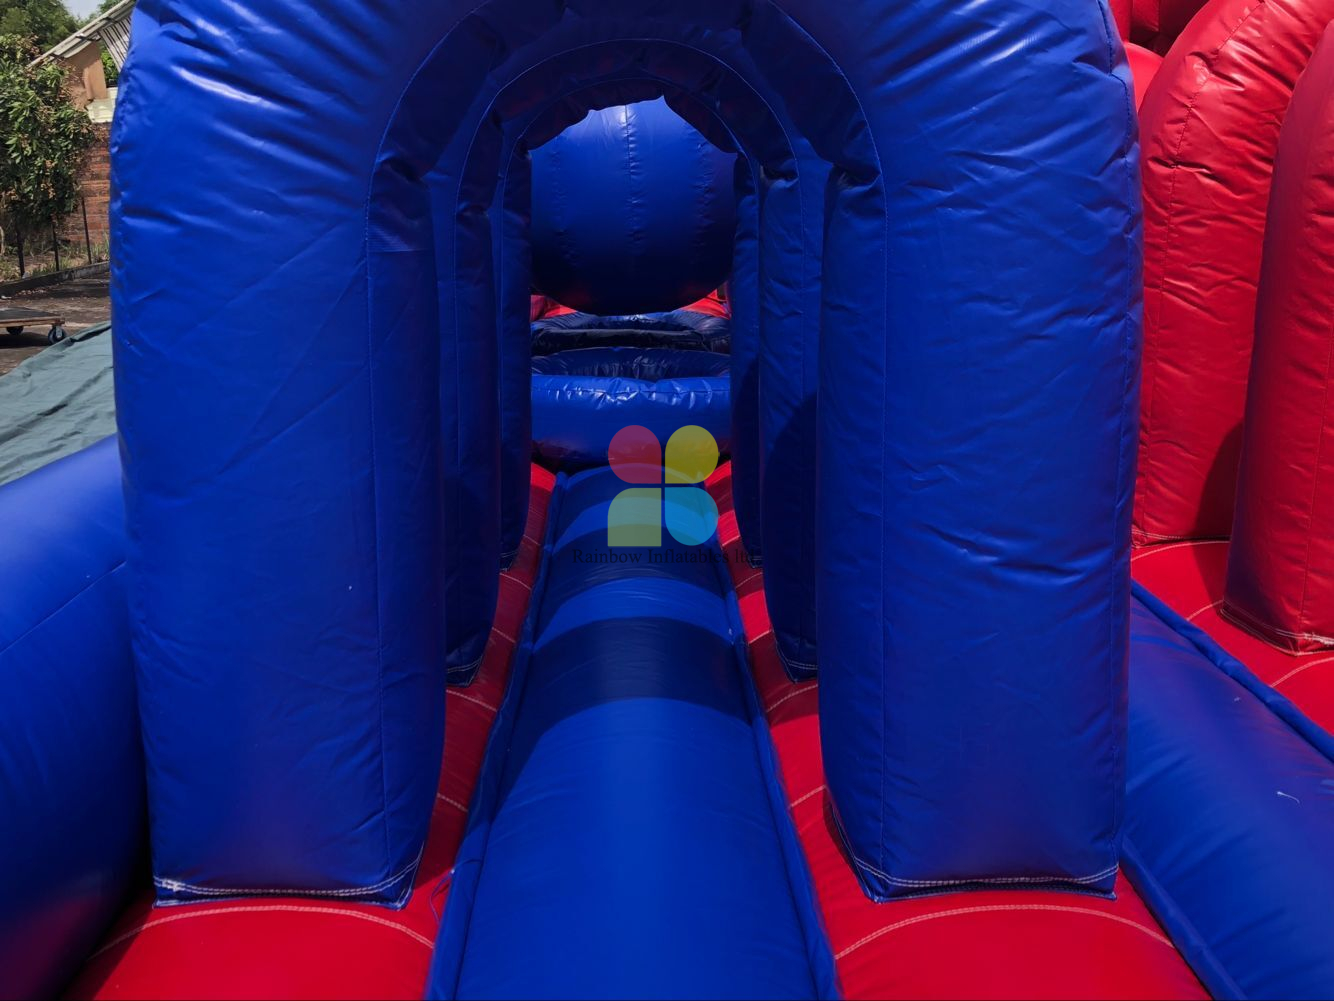 Inflatable Huge Obstacle 